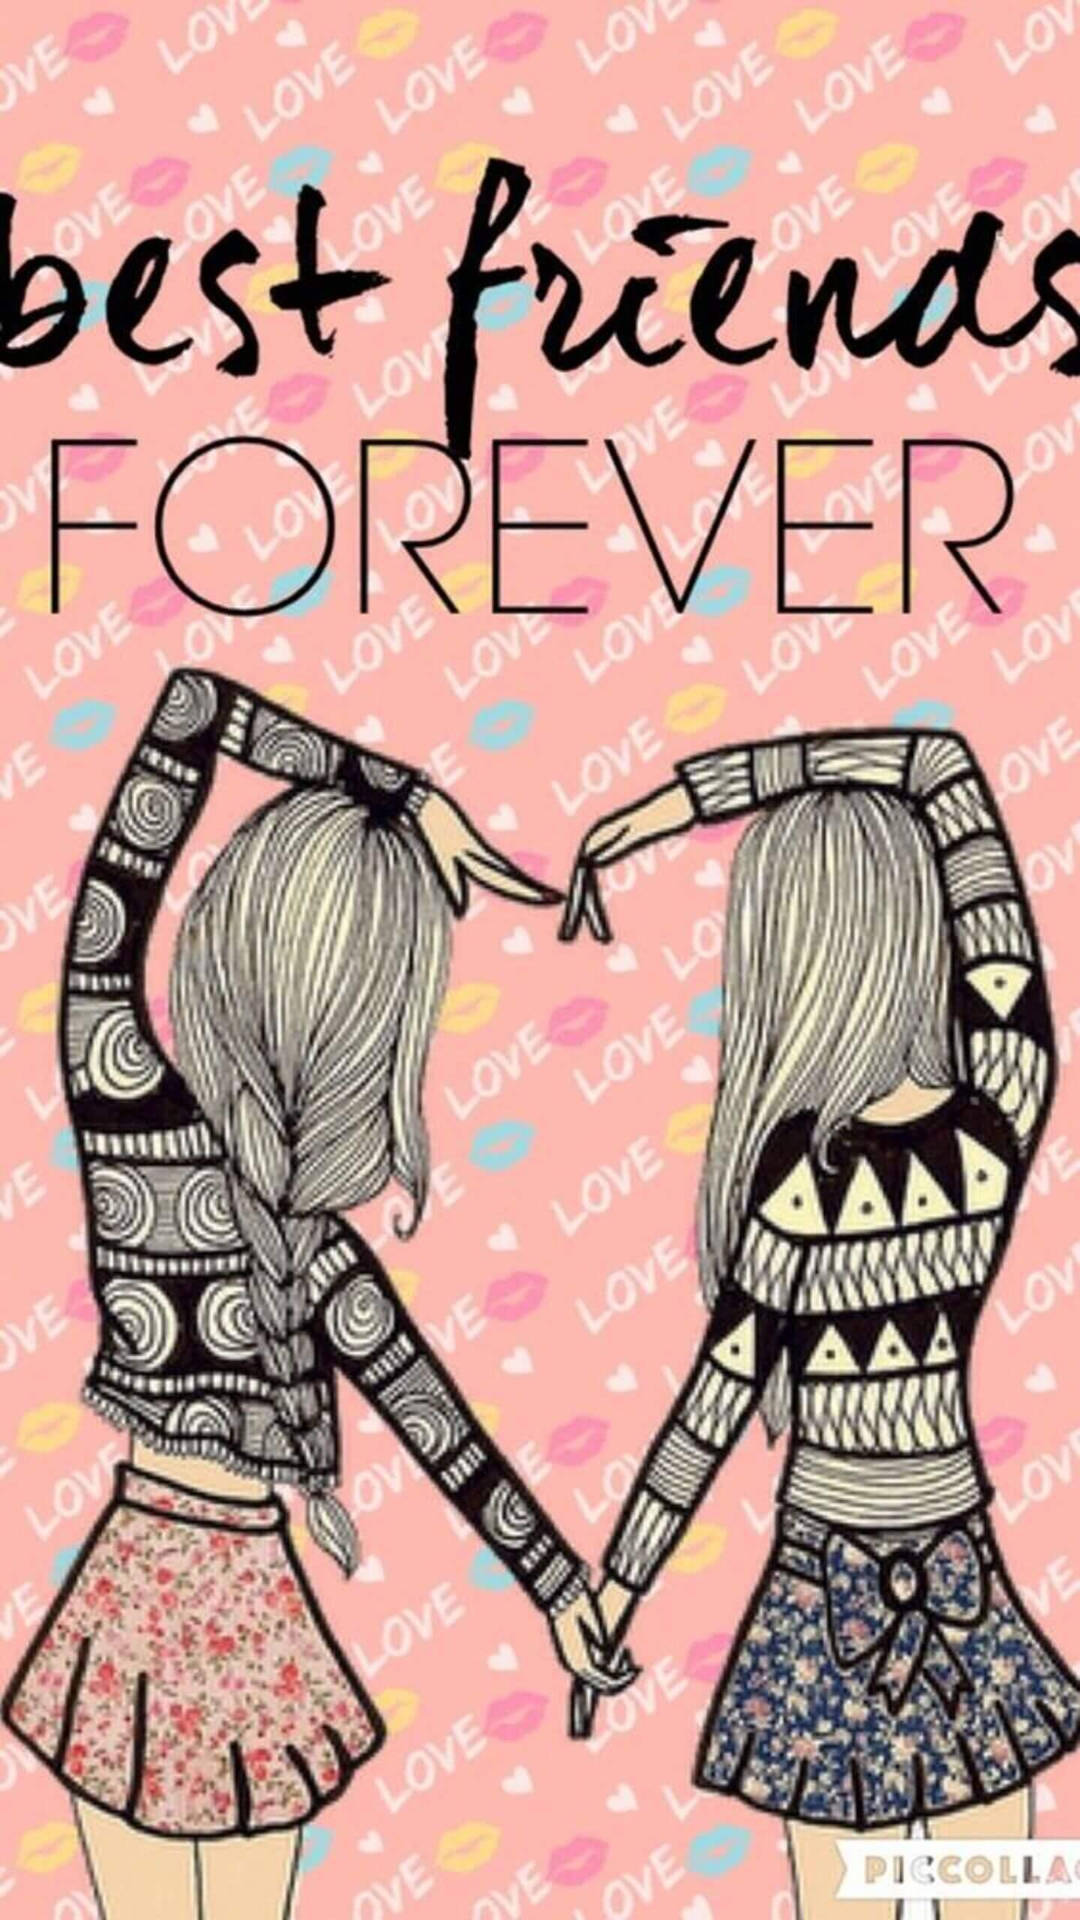 Matching Bff Forever Heart Wallpaper